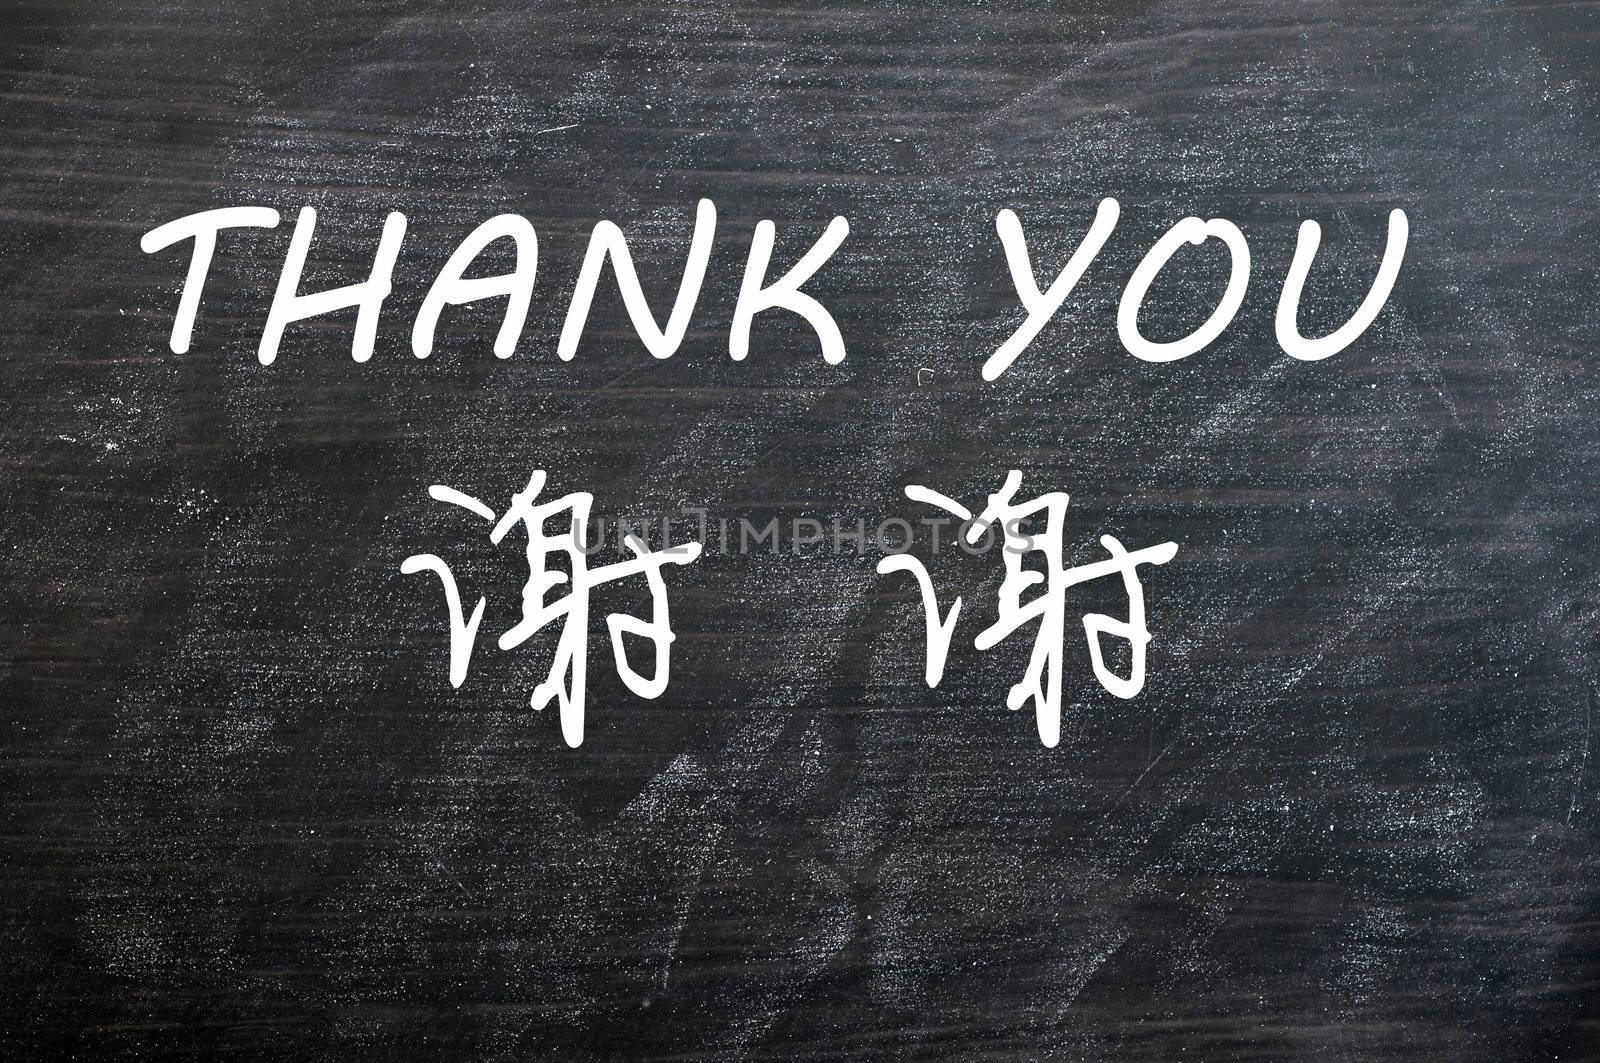 Thank you written in English and Chinese on a blackboard